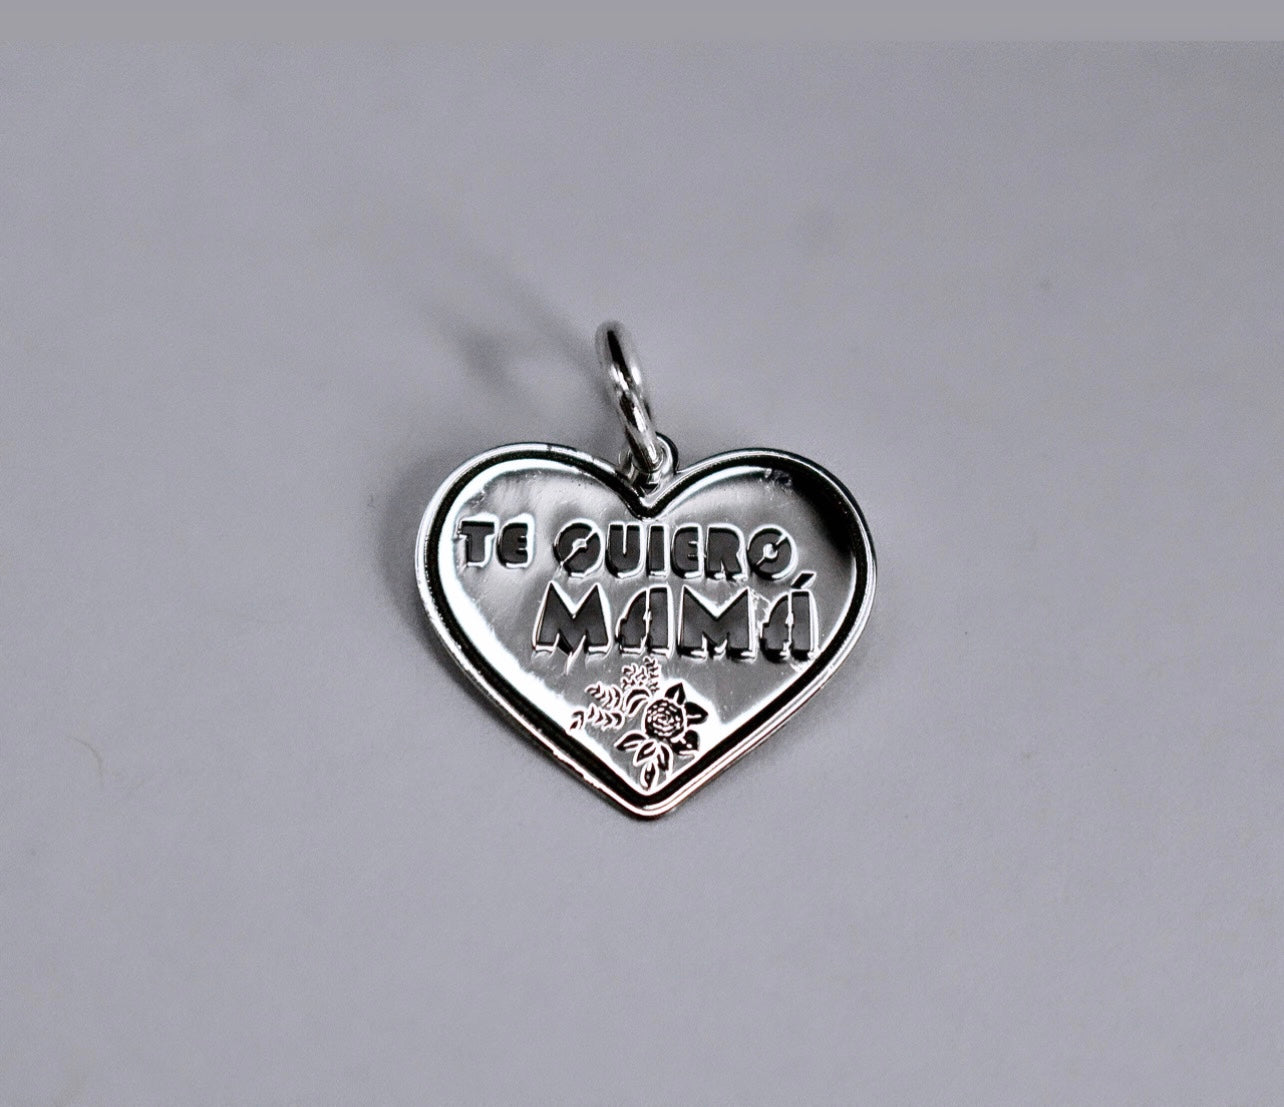 HEART WITH "TE QUIERO MUCHO" QUOTE